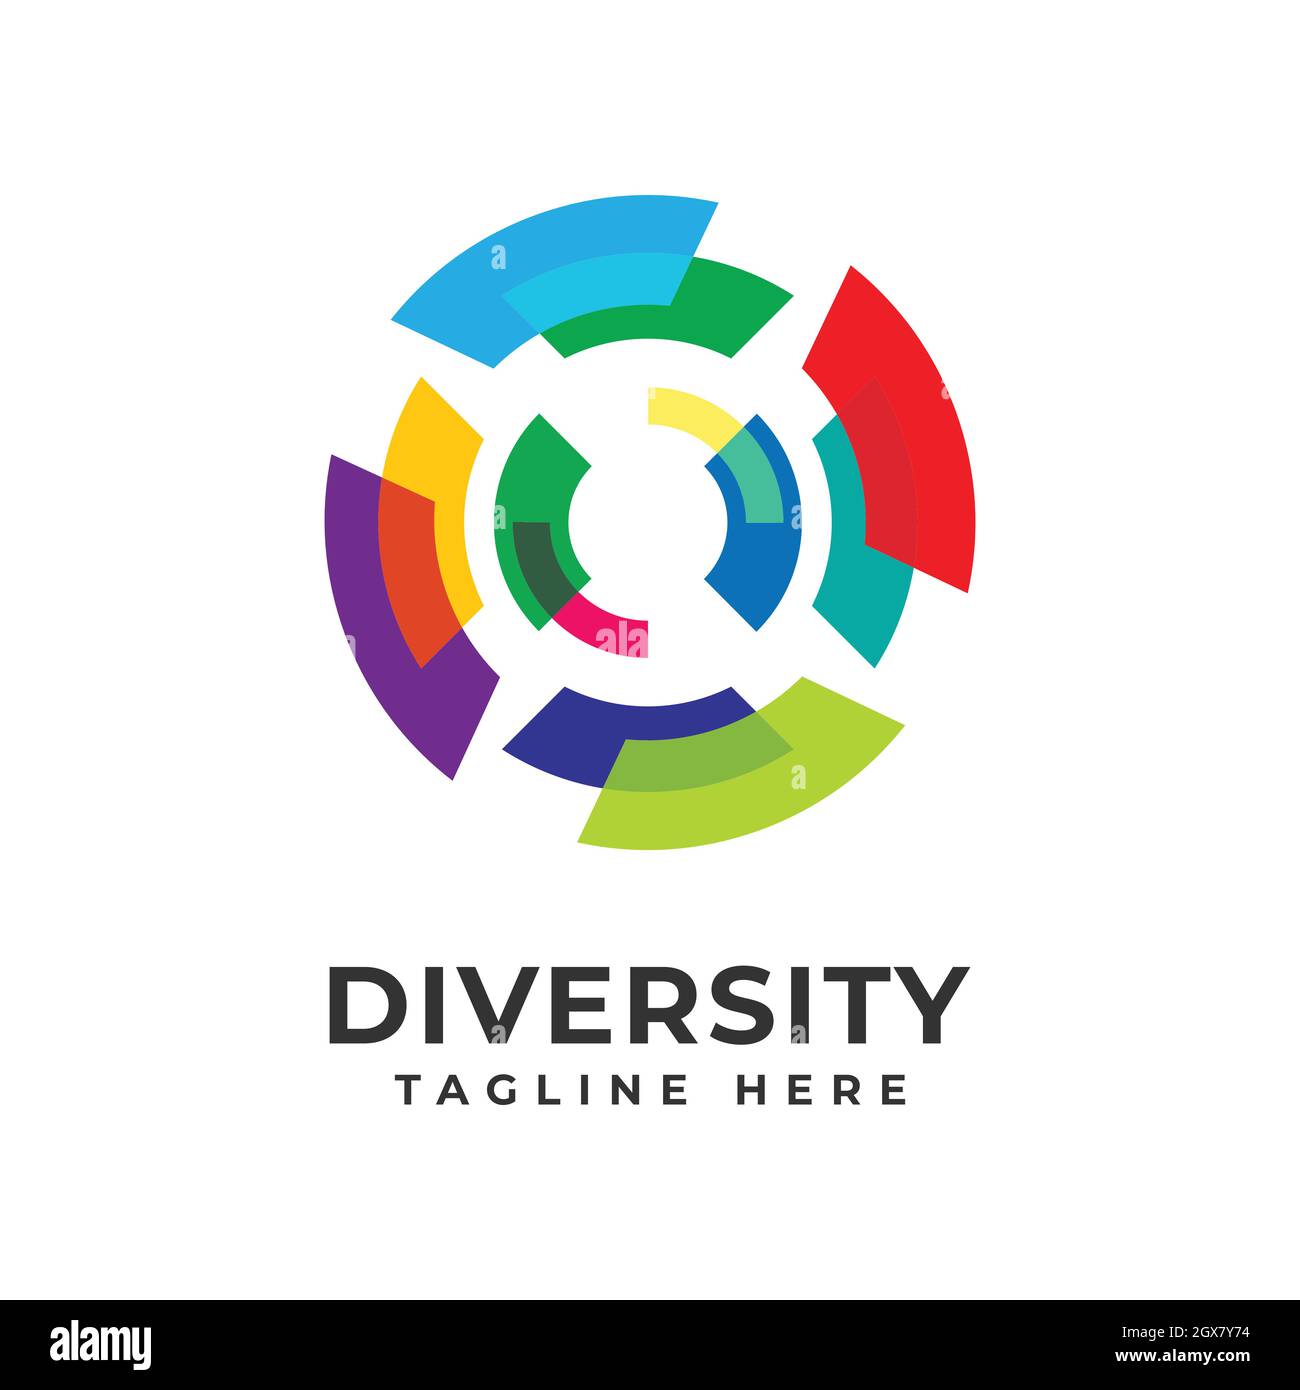 Diversity and inclusion for all Stock Vector Images - Alamy